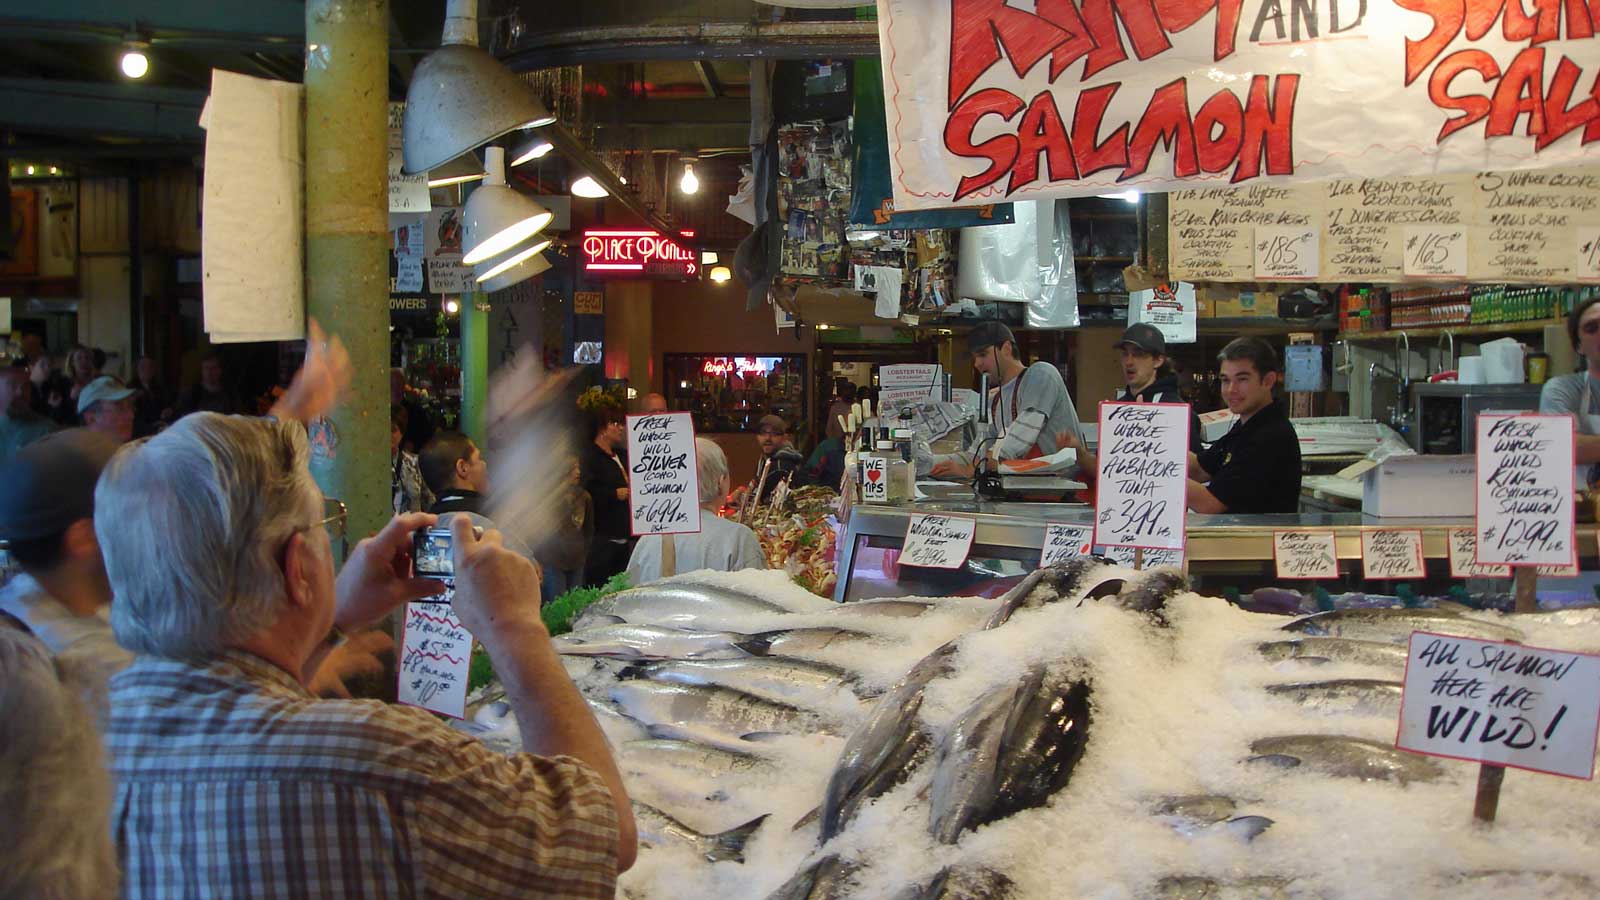 A man catches a flying fish at Pike Place Market